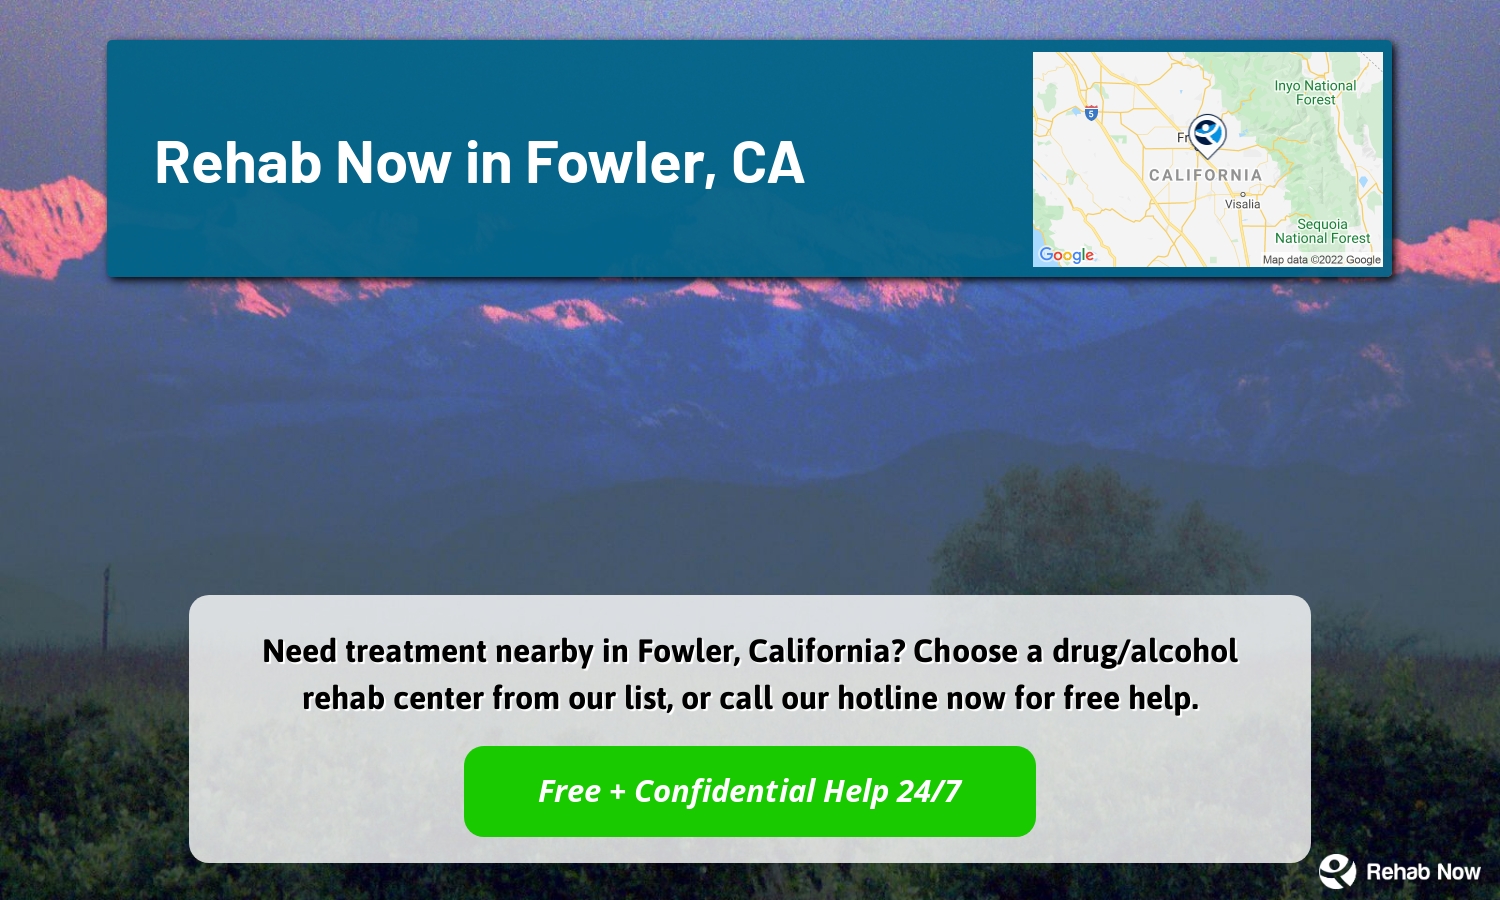 Need treatment nearby in Fowler, California? Choose a drug/alcohol rehab center from our list, or call our hotline now for free help.